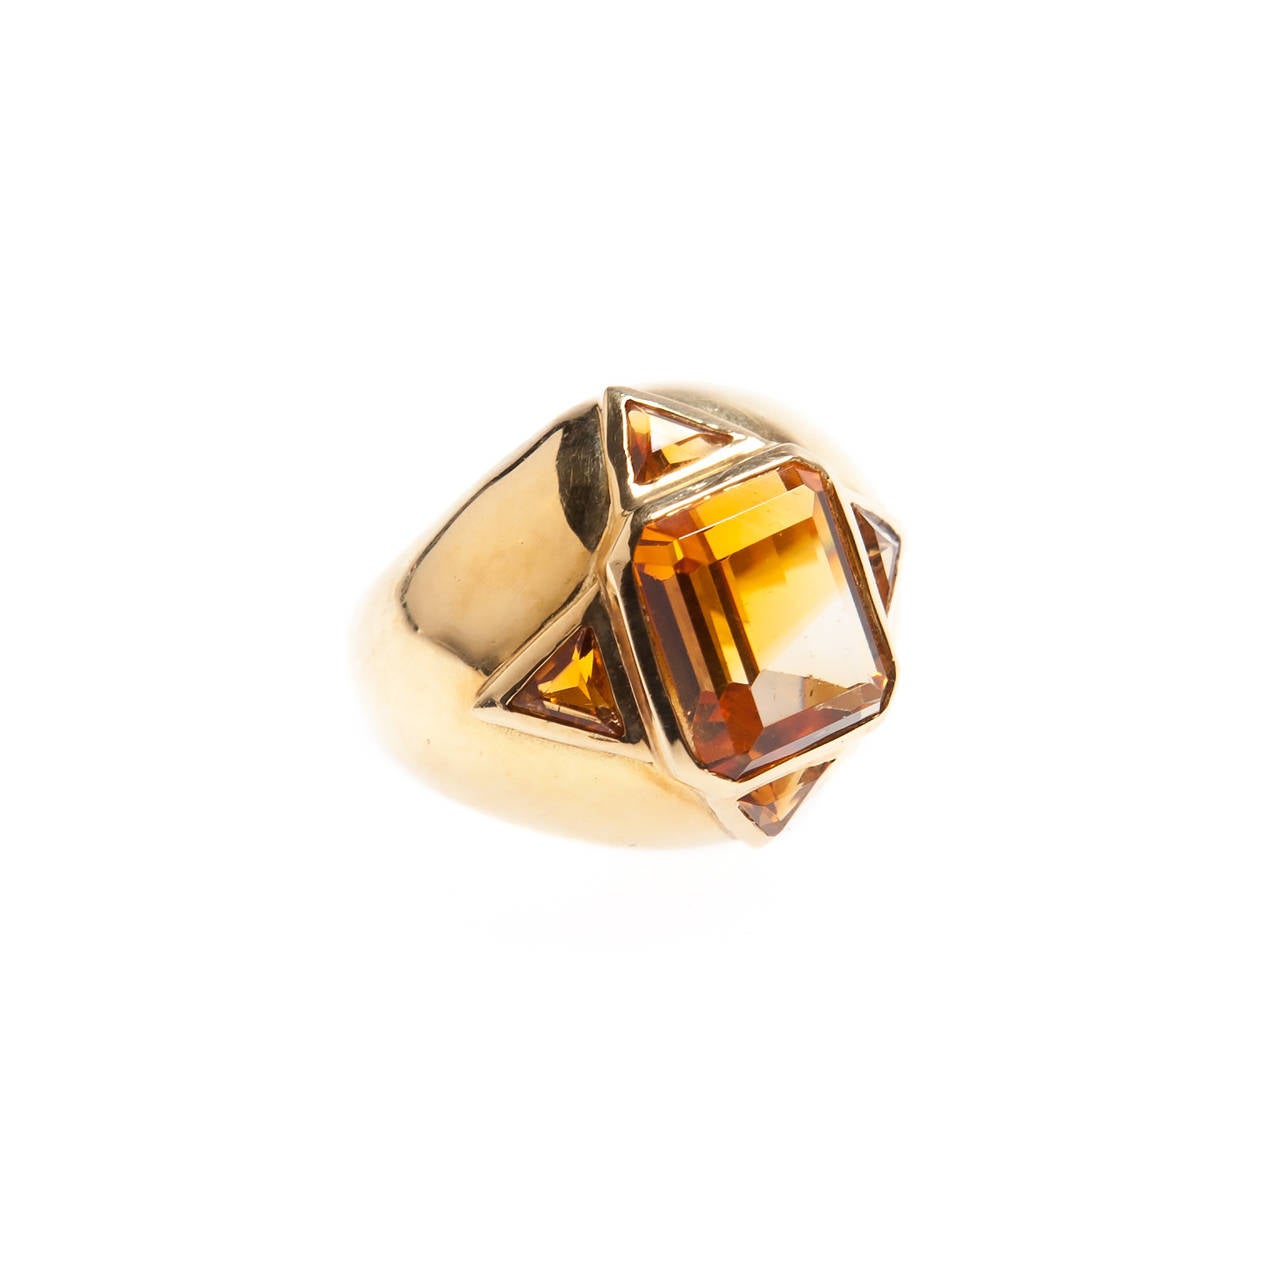 Beautiful dome shaped 18k gold ring from the 1980's.
Center emerald cut 6.10 carat citrine surrounded by 4 trapezoid citrines.
Size 6 1/2